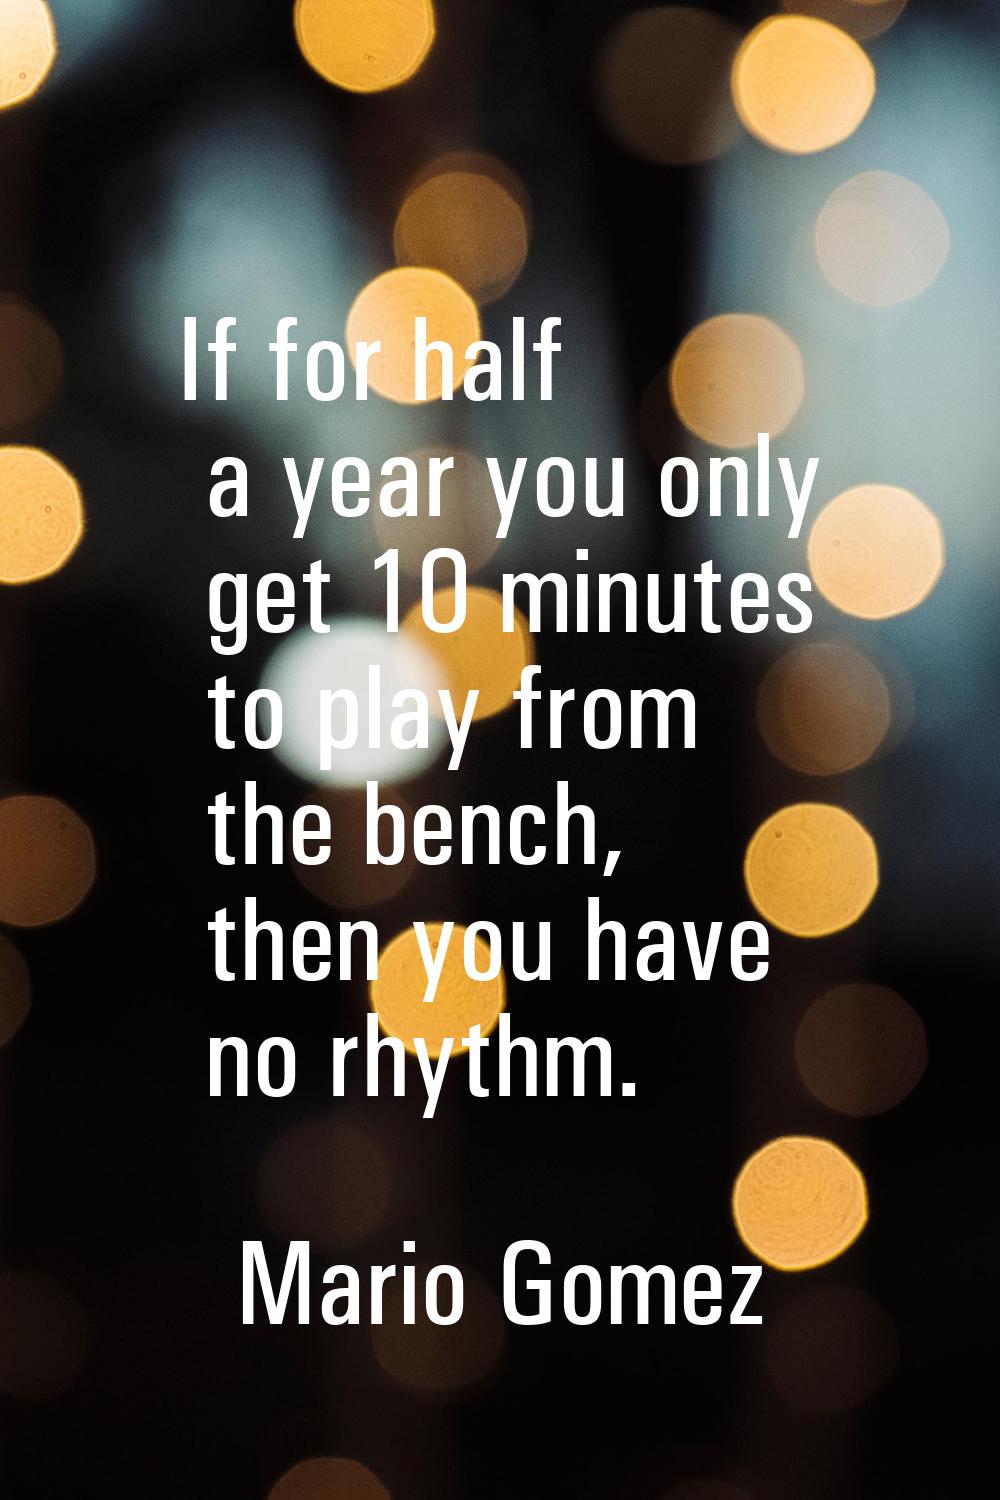 If for half a year you only get 10 minutes to play from the bench, then you have no rhythm.